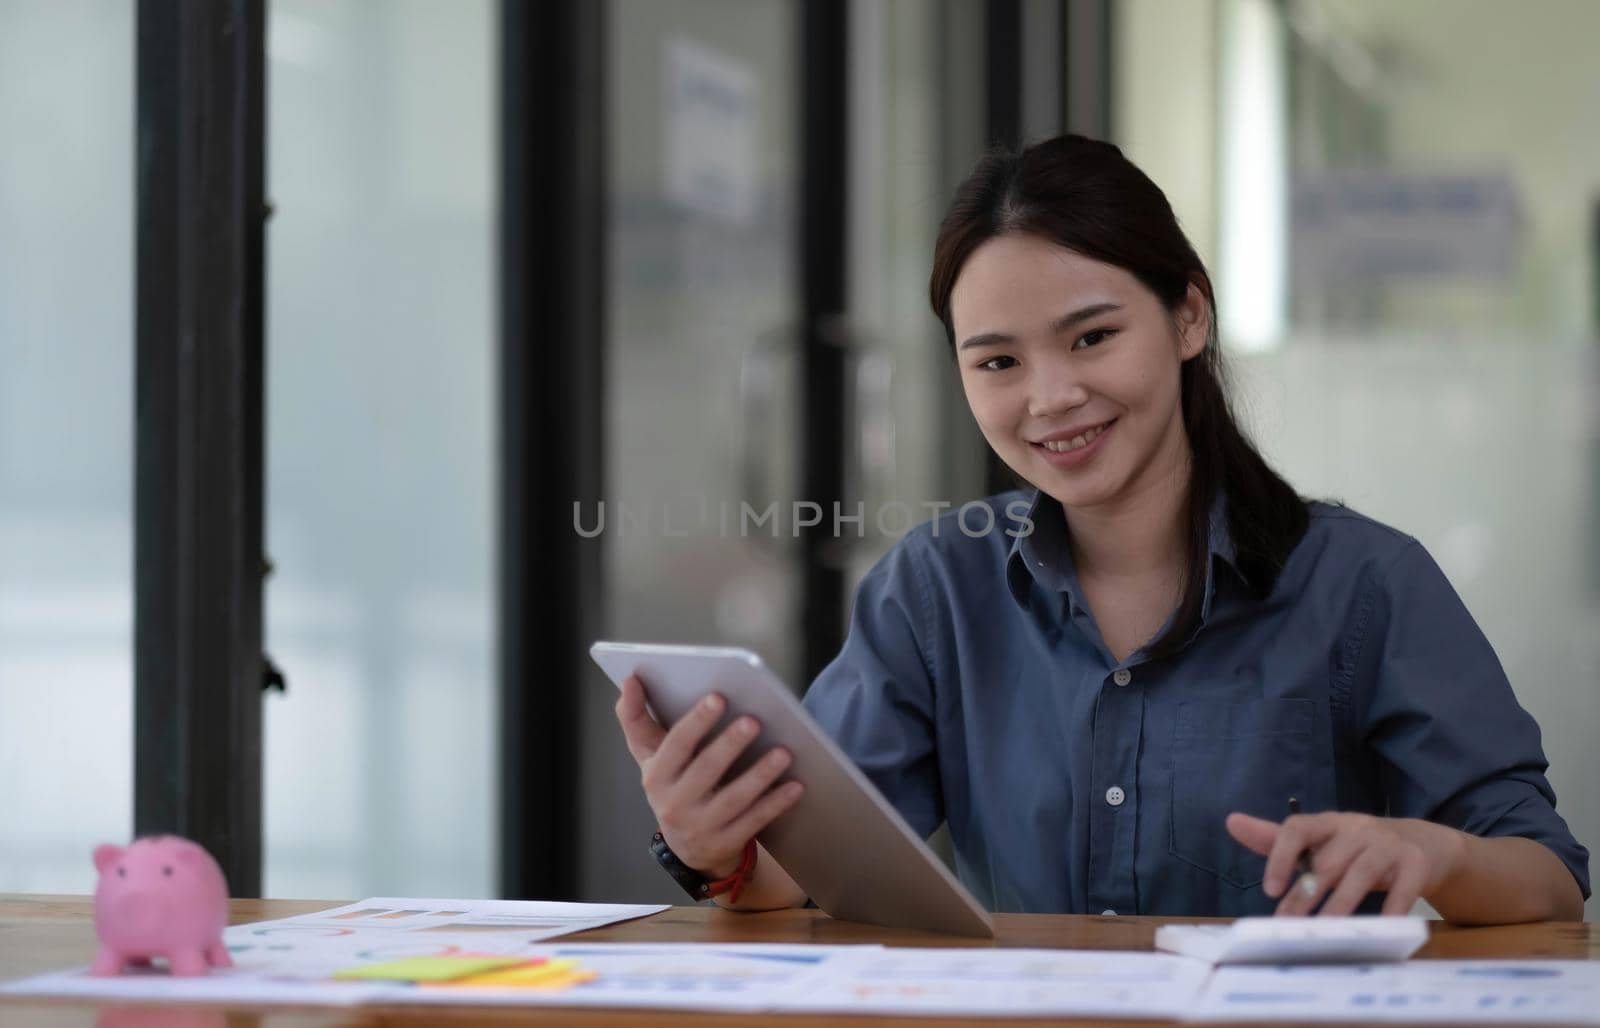 Smiling Asian businesswoman holding a tablet and used calculator at the office. Looking at the camera..